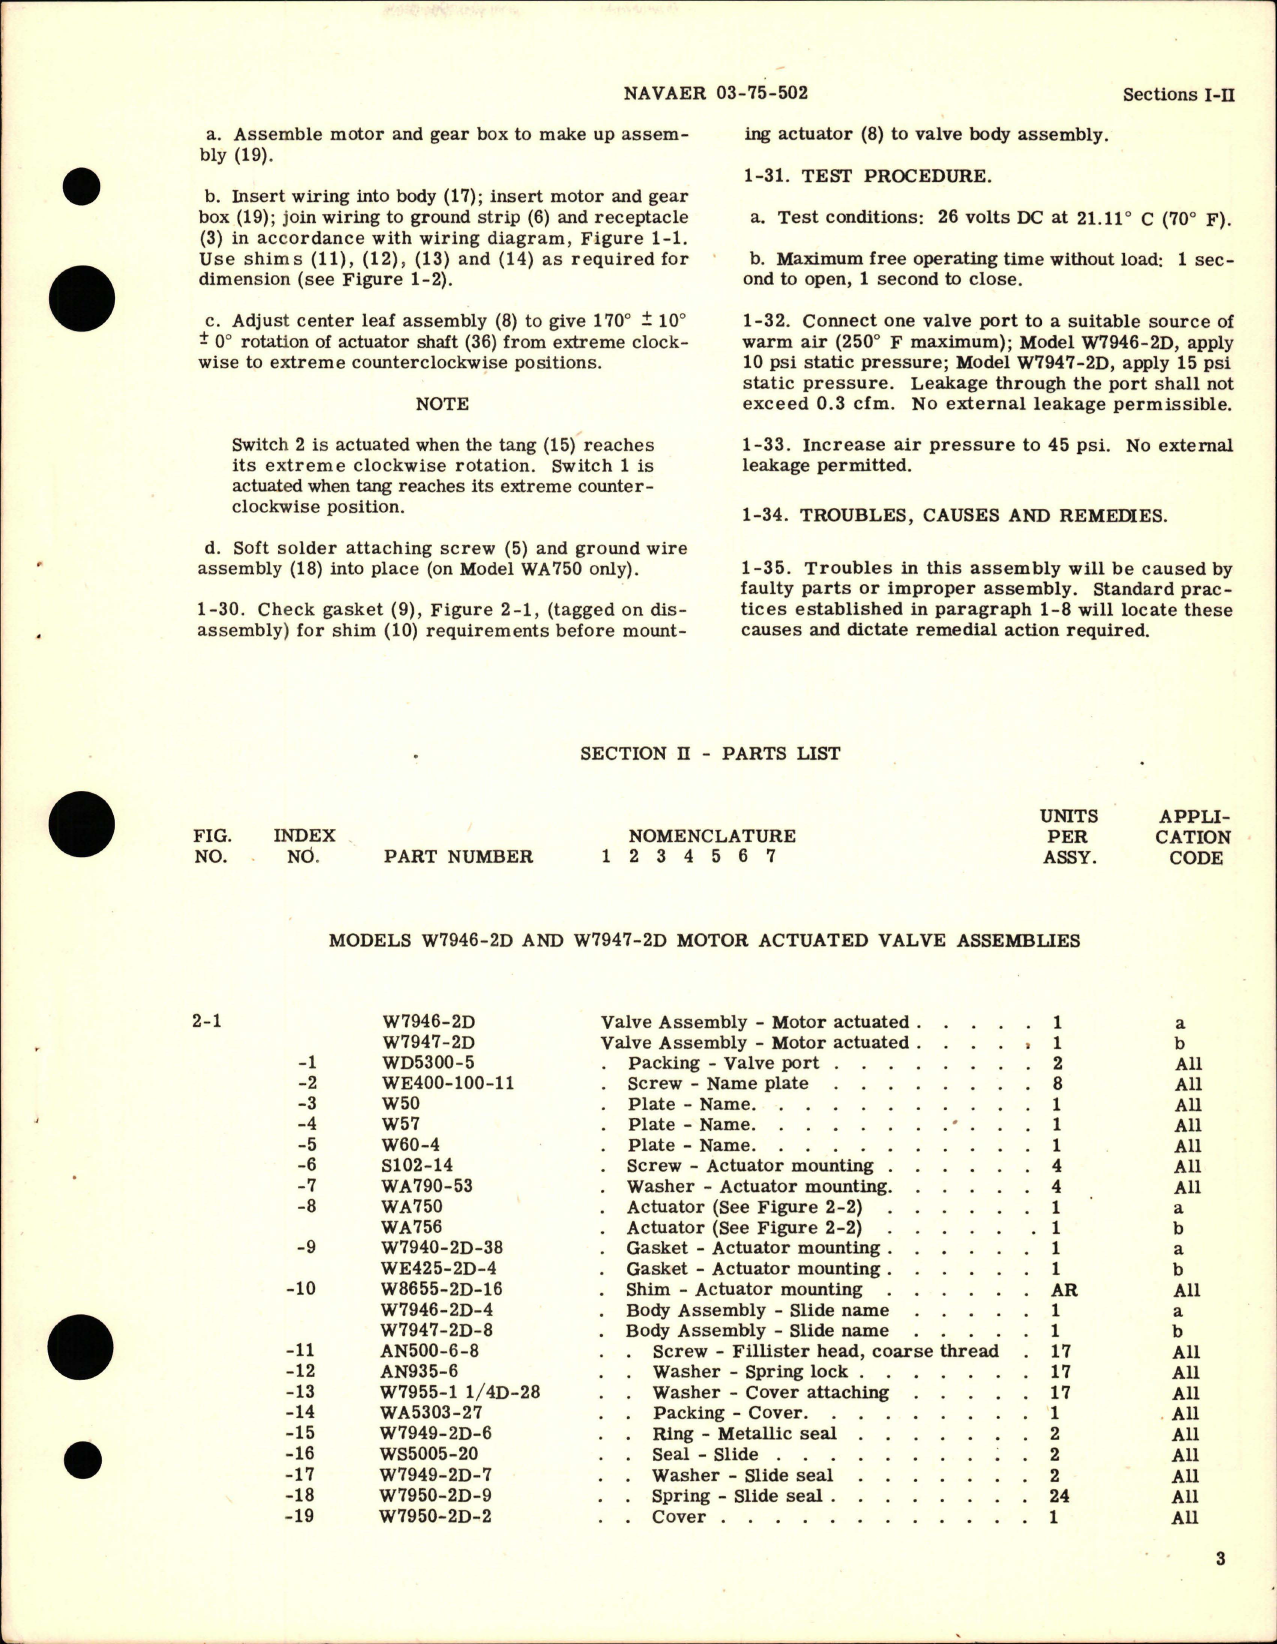 Sample page 5 from AirCorps Library document: Overhaul Instructions with Parts Catalog for Motor Operated Slide Valves - Models W7946-2D and W7947-2D 